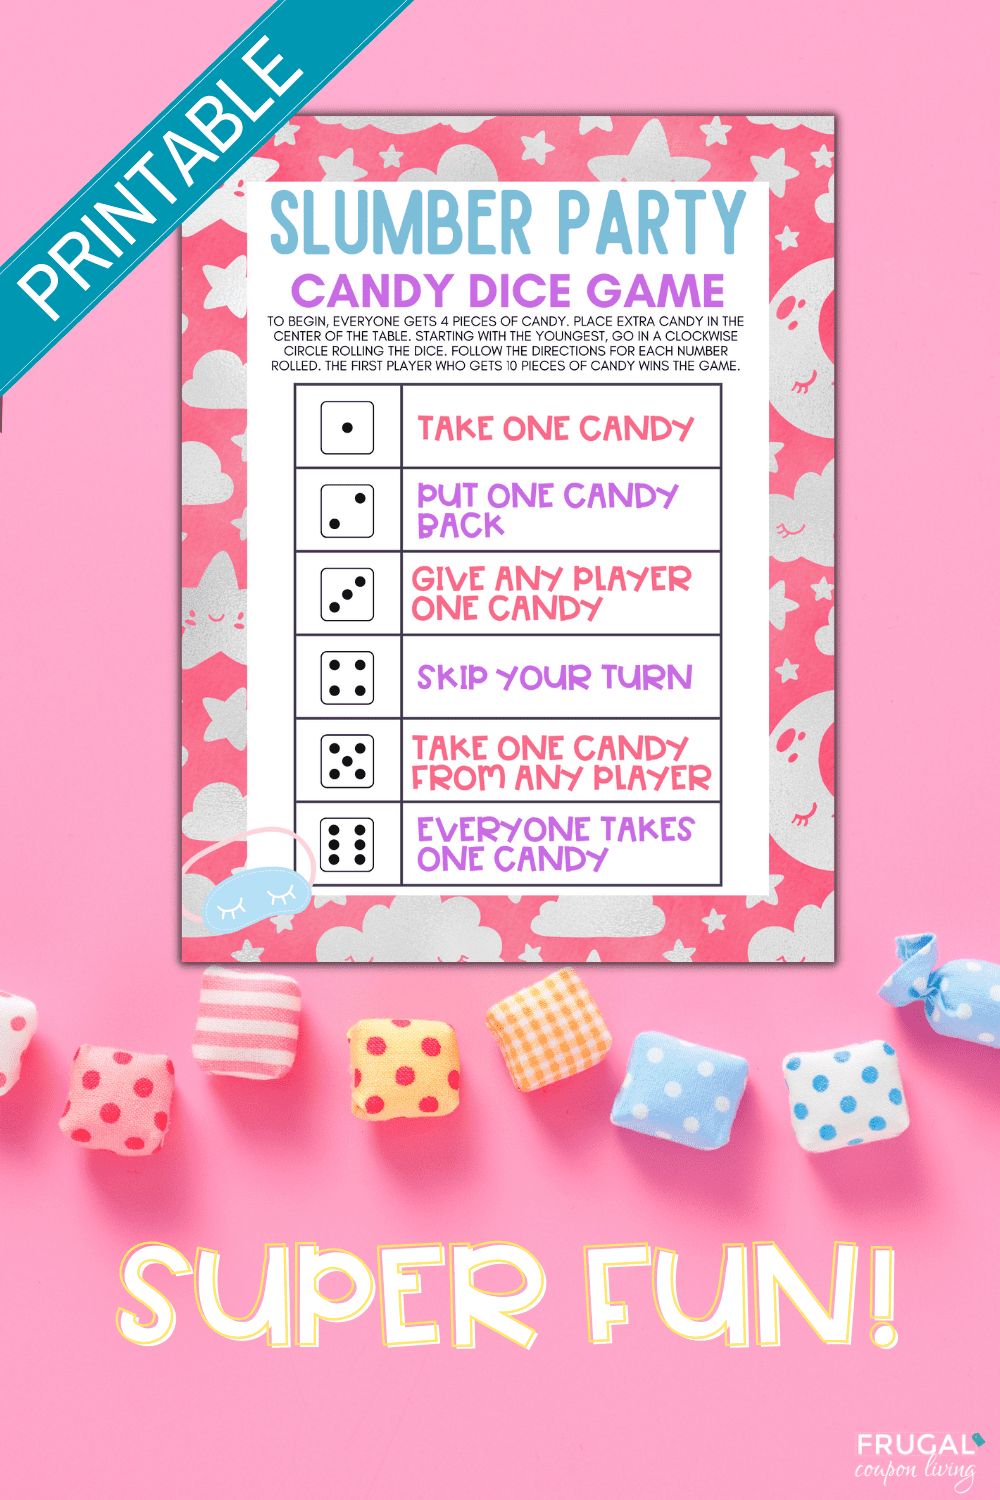 spend the night slumber party games with dice